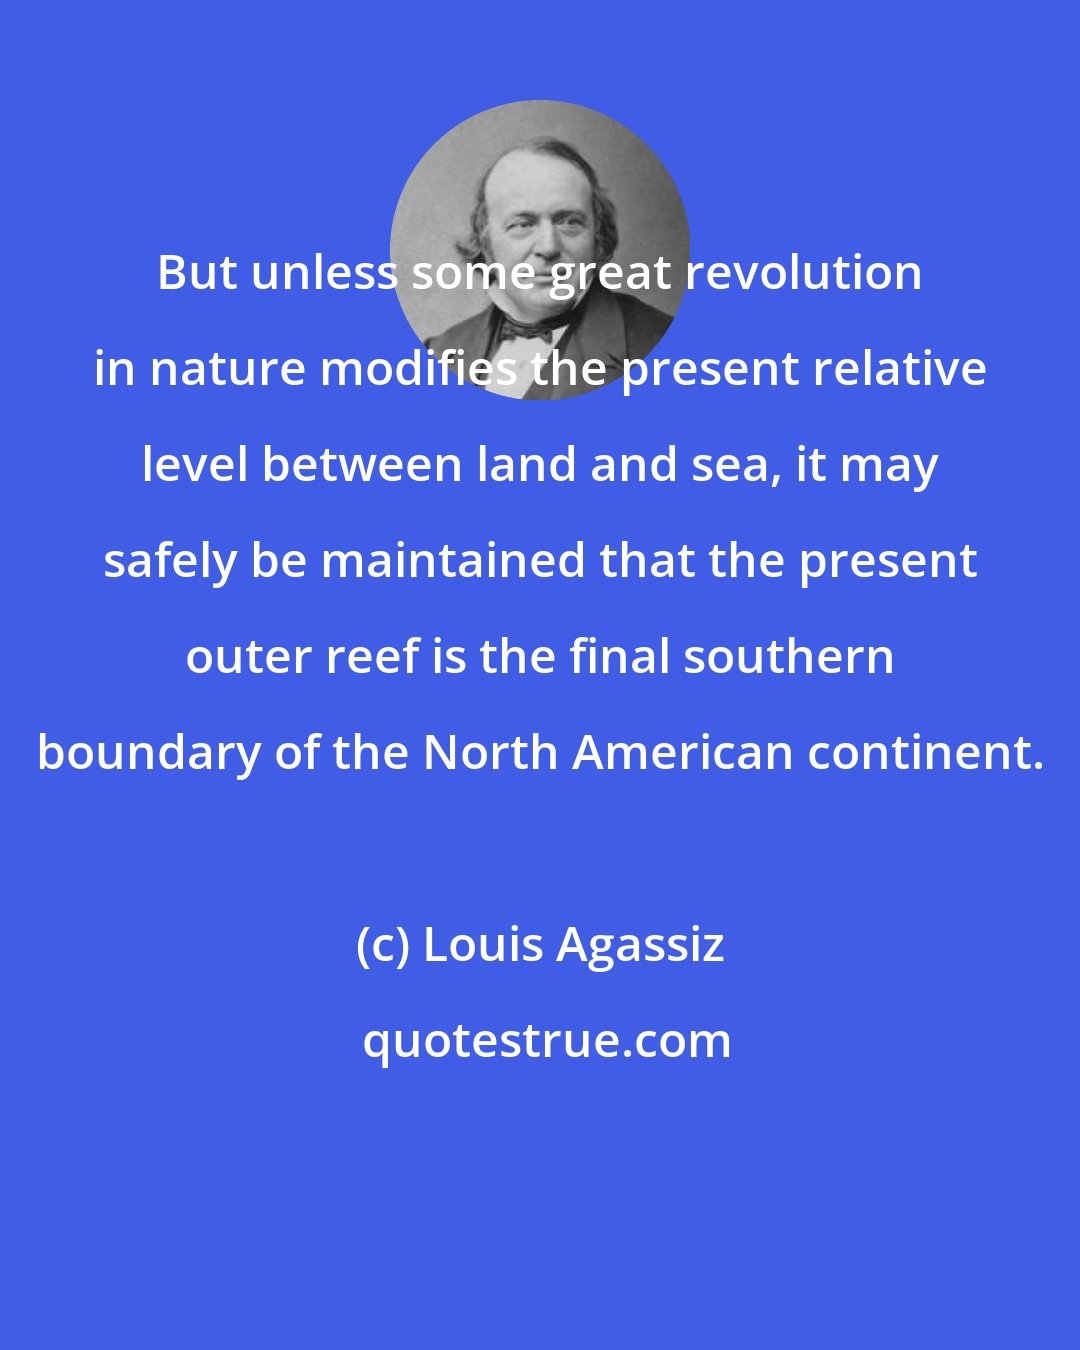 Louis Agassiz: But unless some great revolution in nature modifies the present relative level between land and sea, it may safely be maintained that the present outer reef is the final southern boundary of the North American continent.